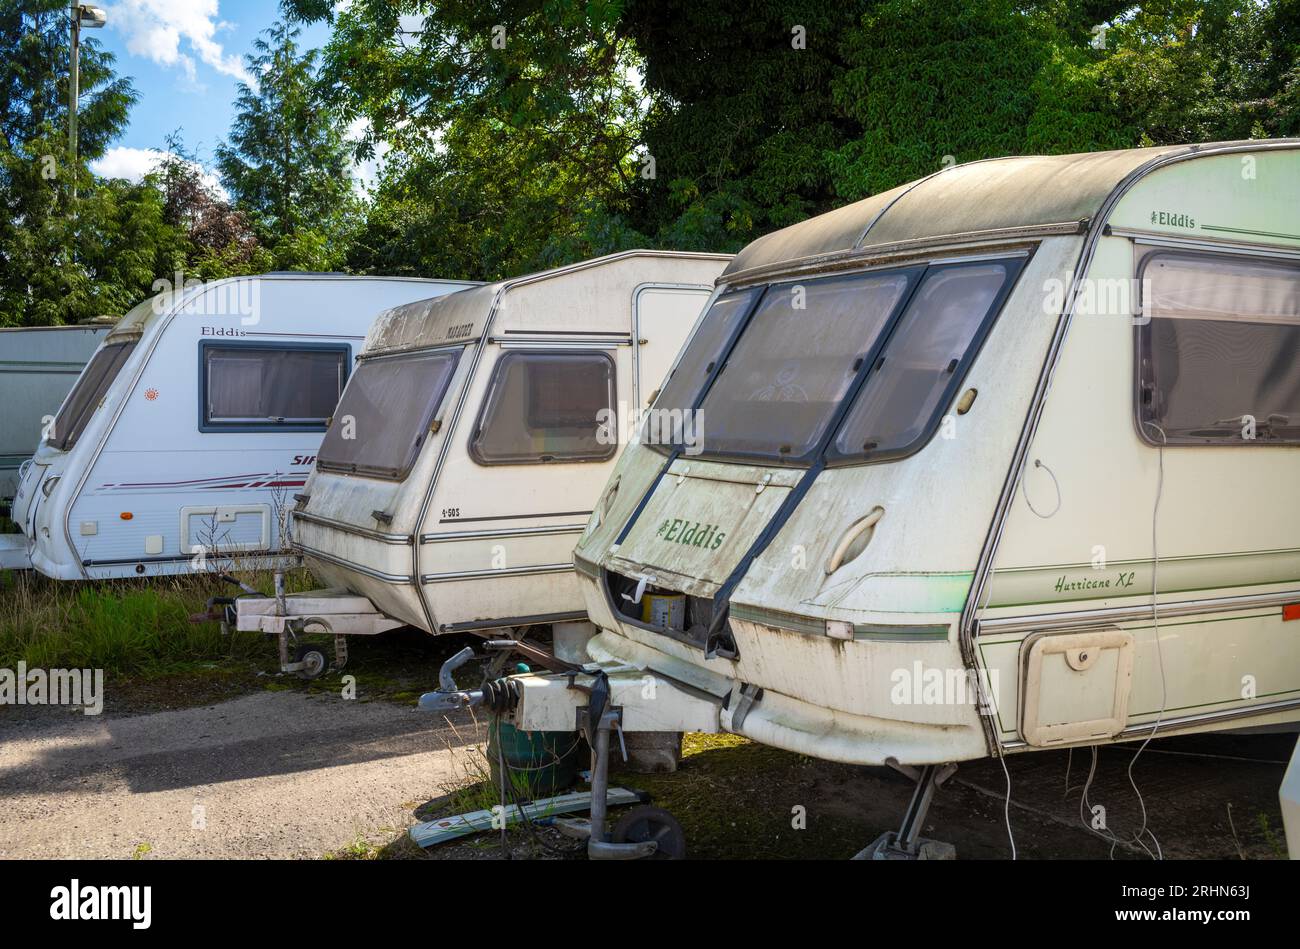 A row of mostly delapidated and dirty caravans parked at Lincoln Farm Truck Stop in Bassall Common, Solihull, West Midlands, UK. The truck stop and ca Stock Photo